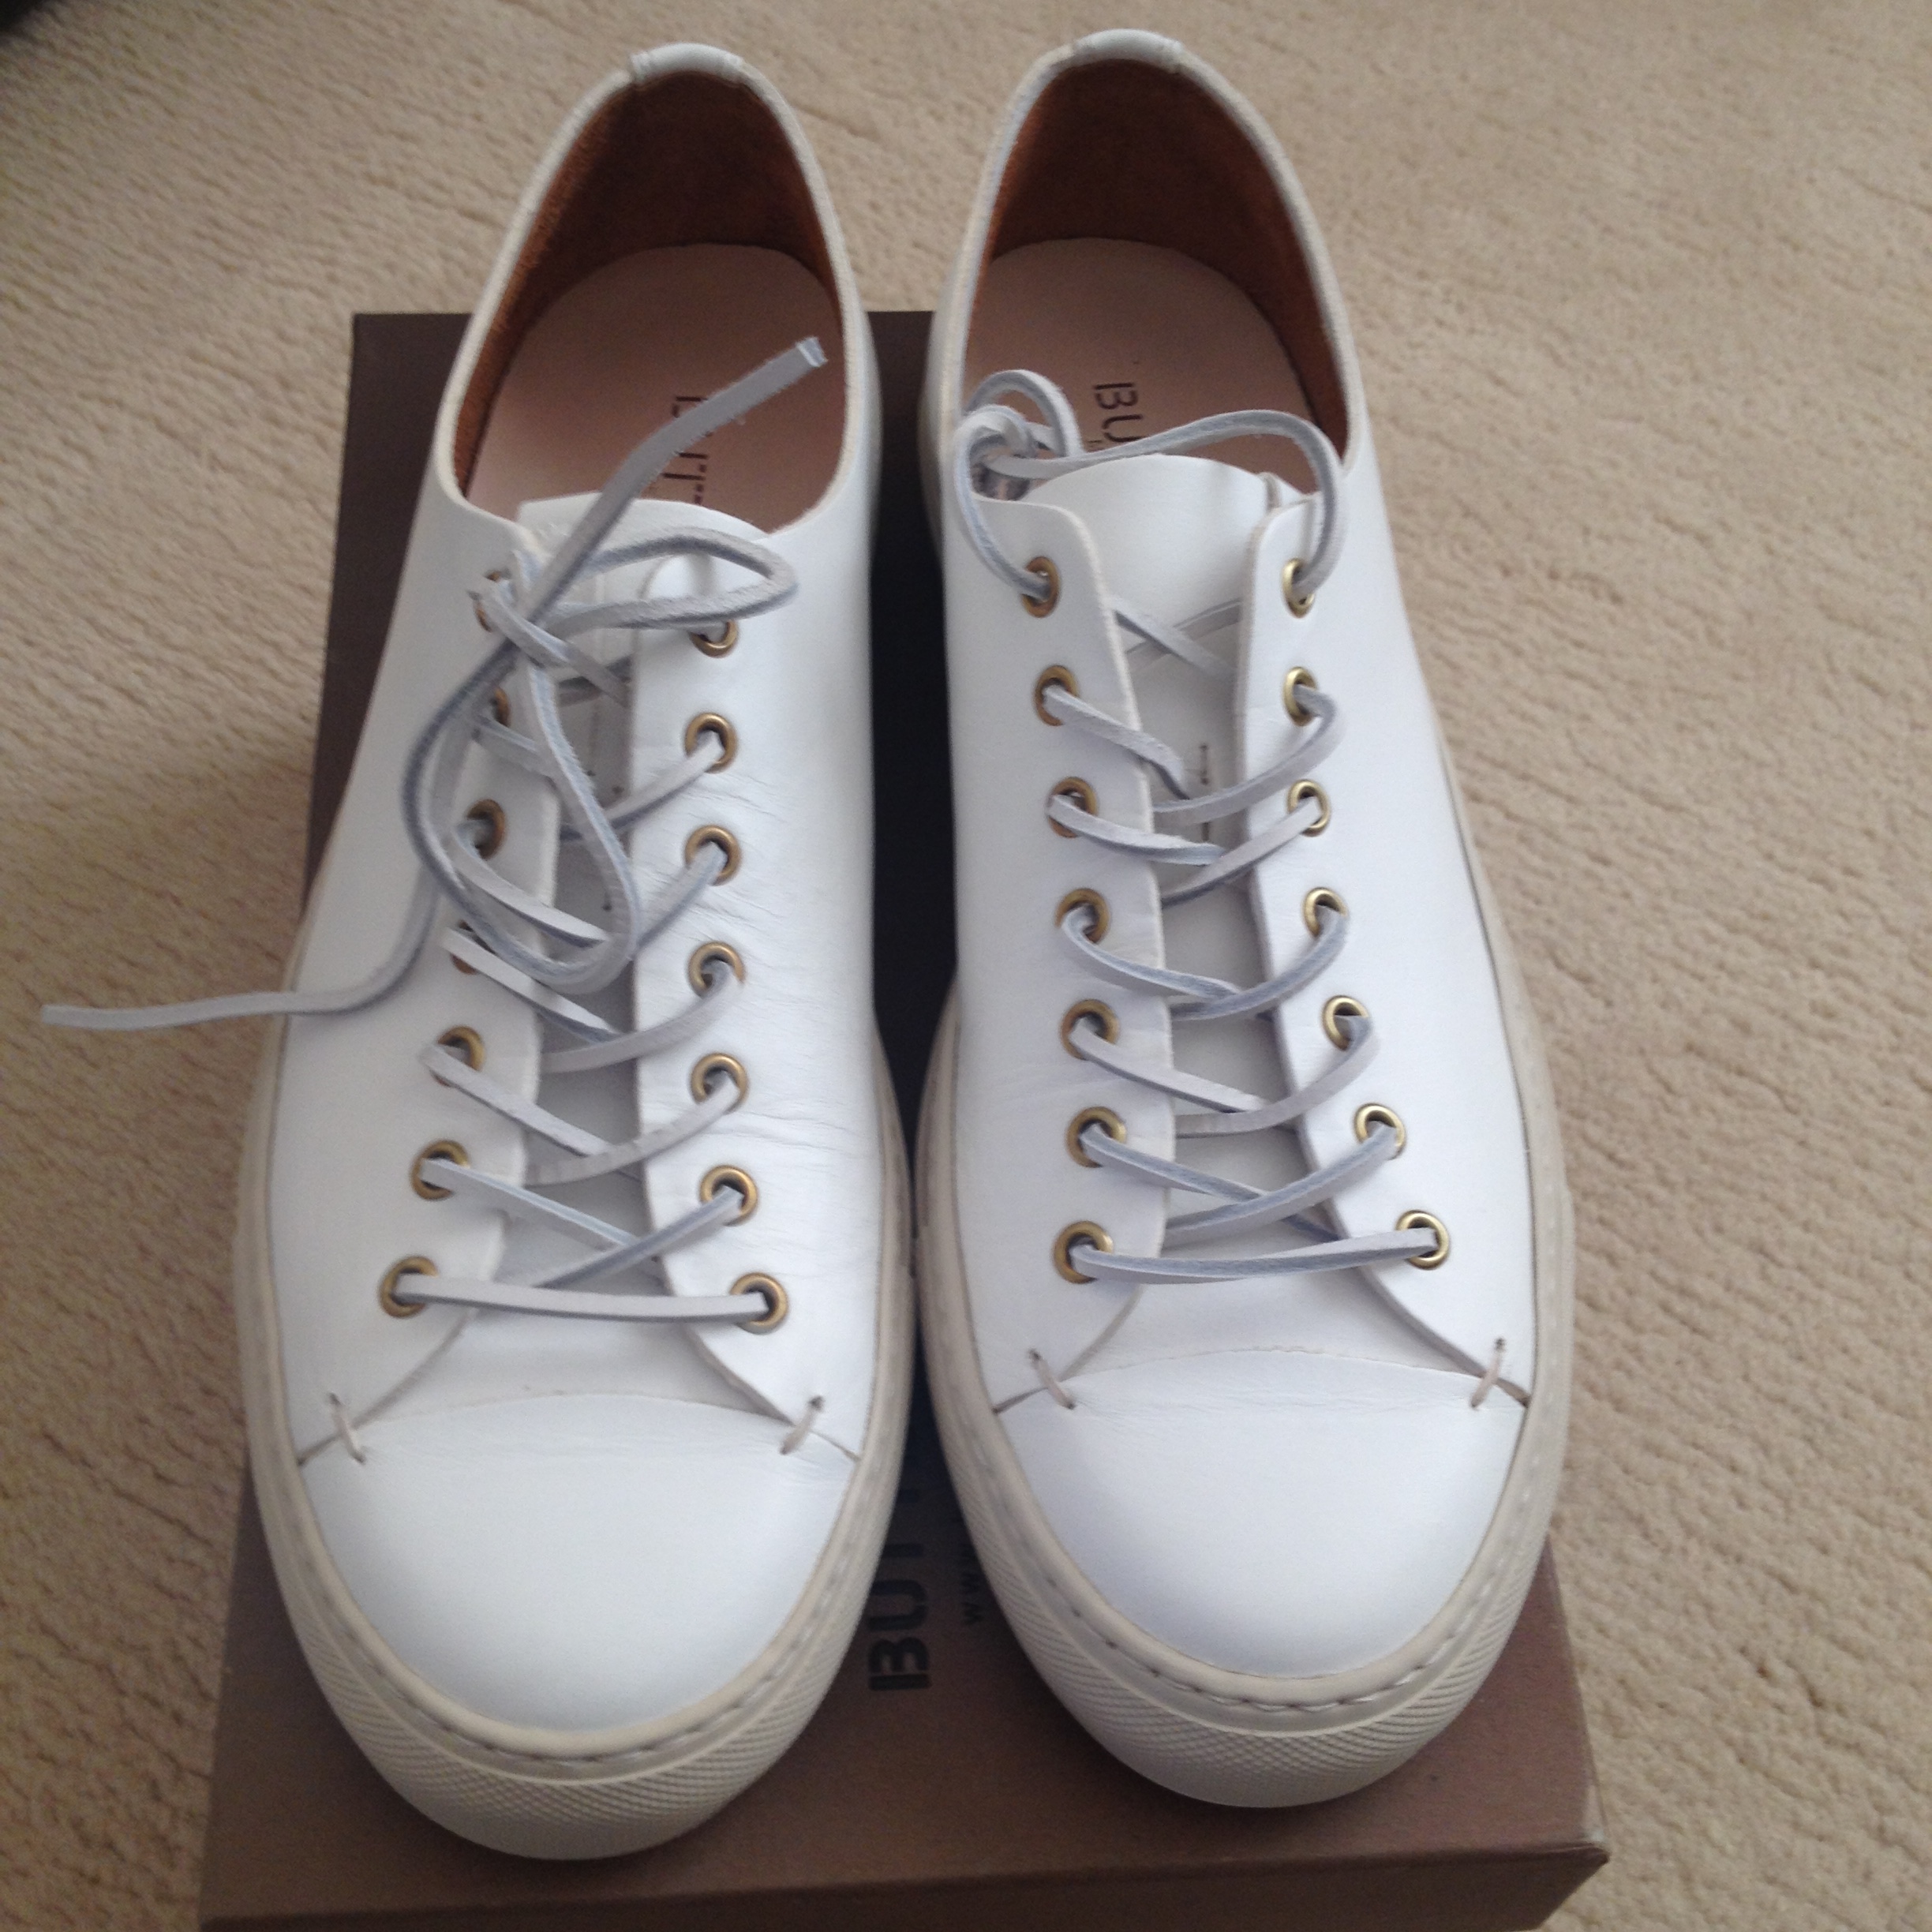 Buttero sneakers quality and Buttero customer service | Page 2 | Styleforum